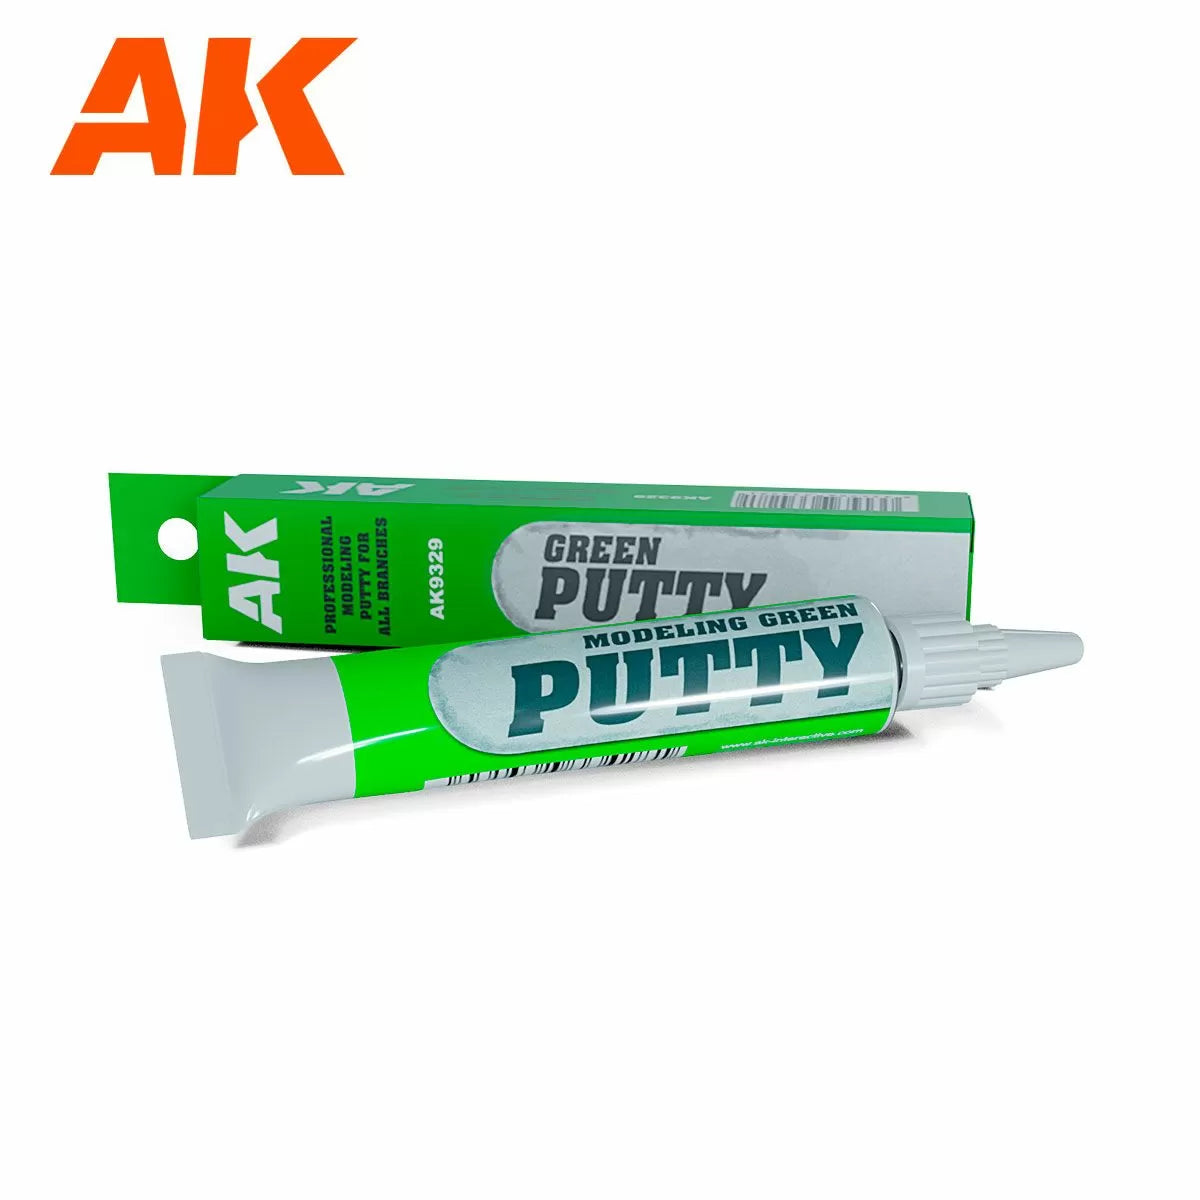 AK-Interactive: Modelling Green Putty - High Quality